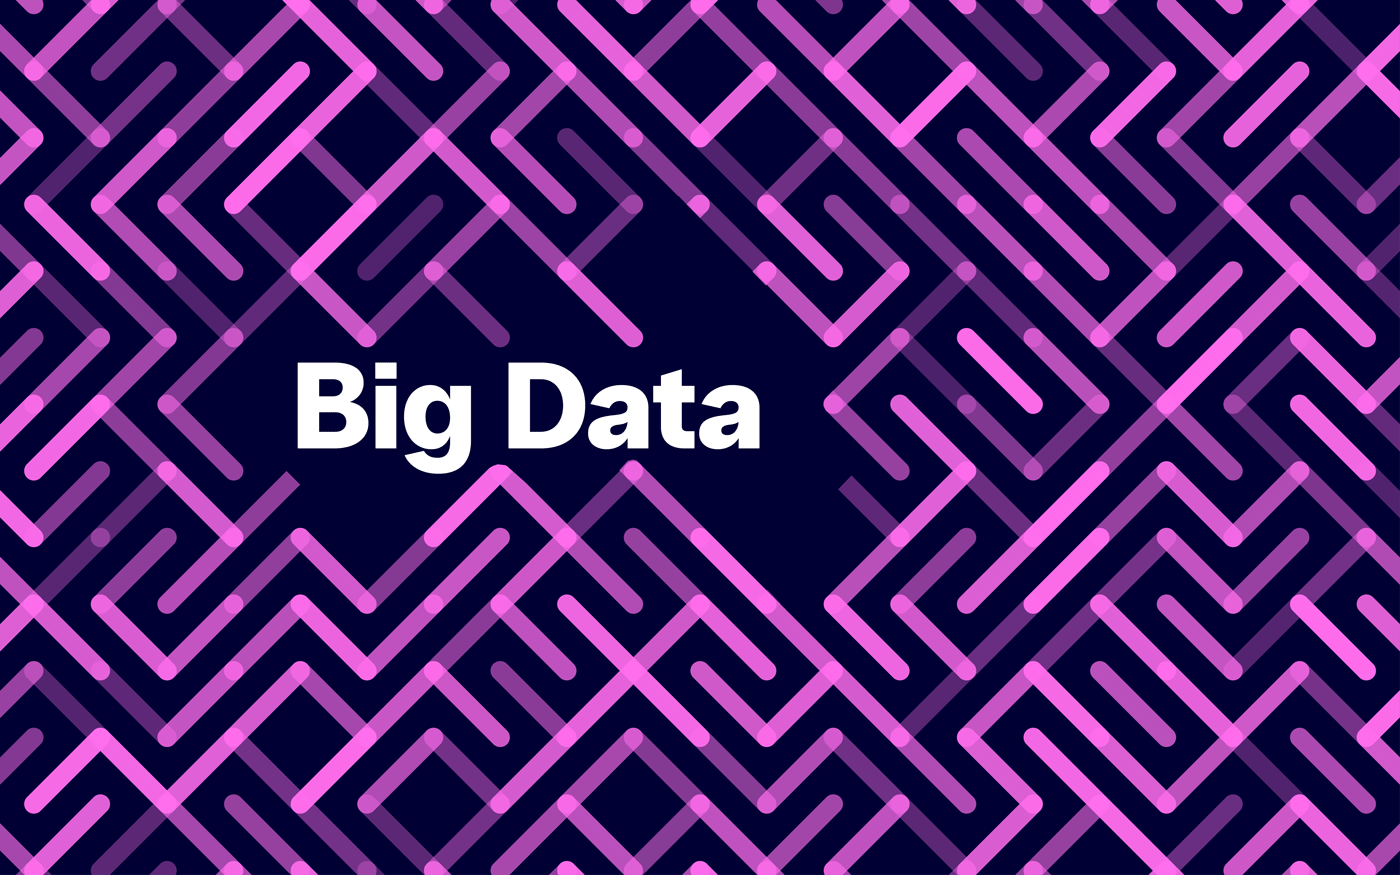 How to leverage Big Data for marketing